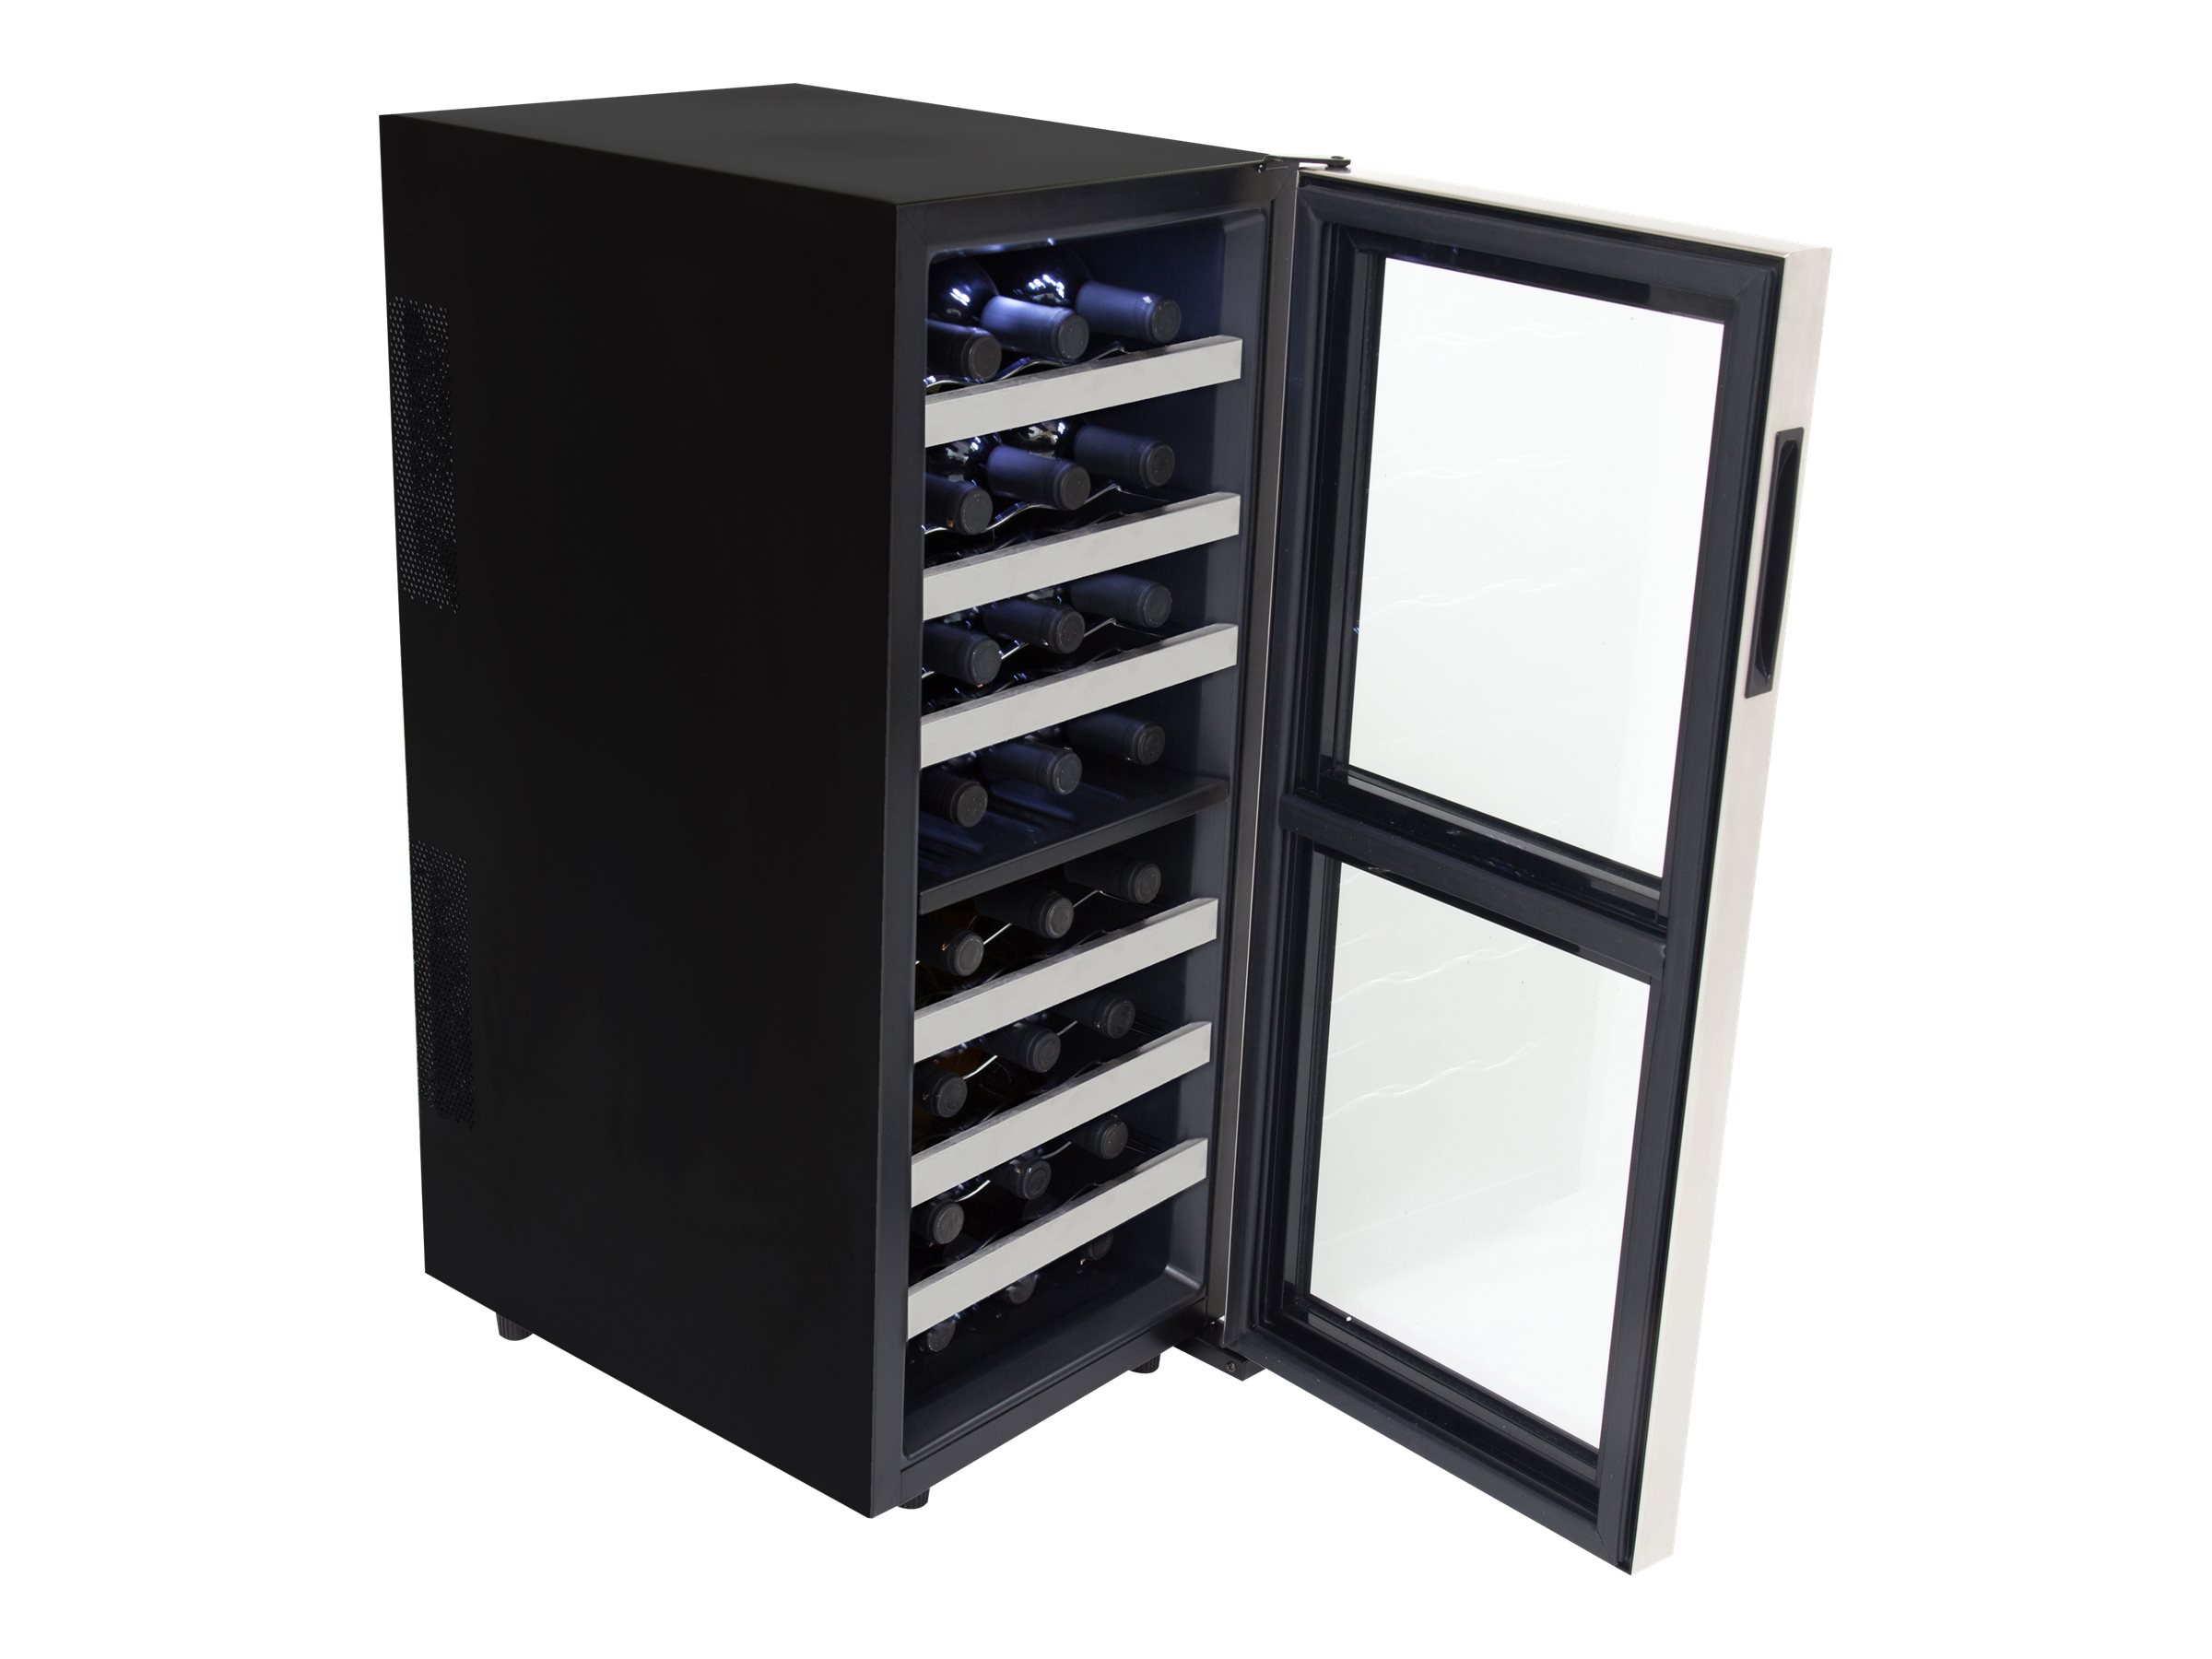 Whynter WC-241DS - Wine cooler - width: 14 in - depth: 20.2 in - height: 33.5 in - image 3 of 6